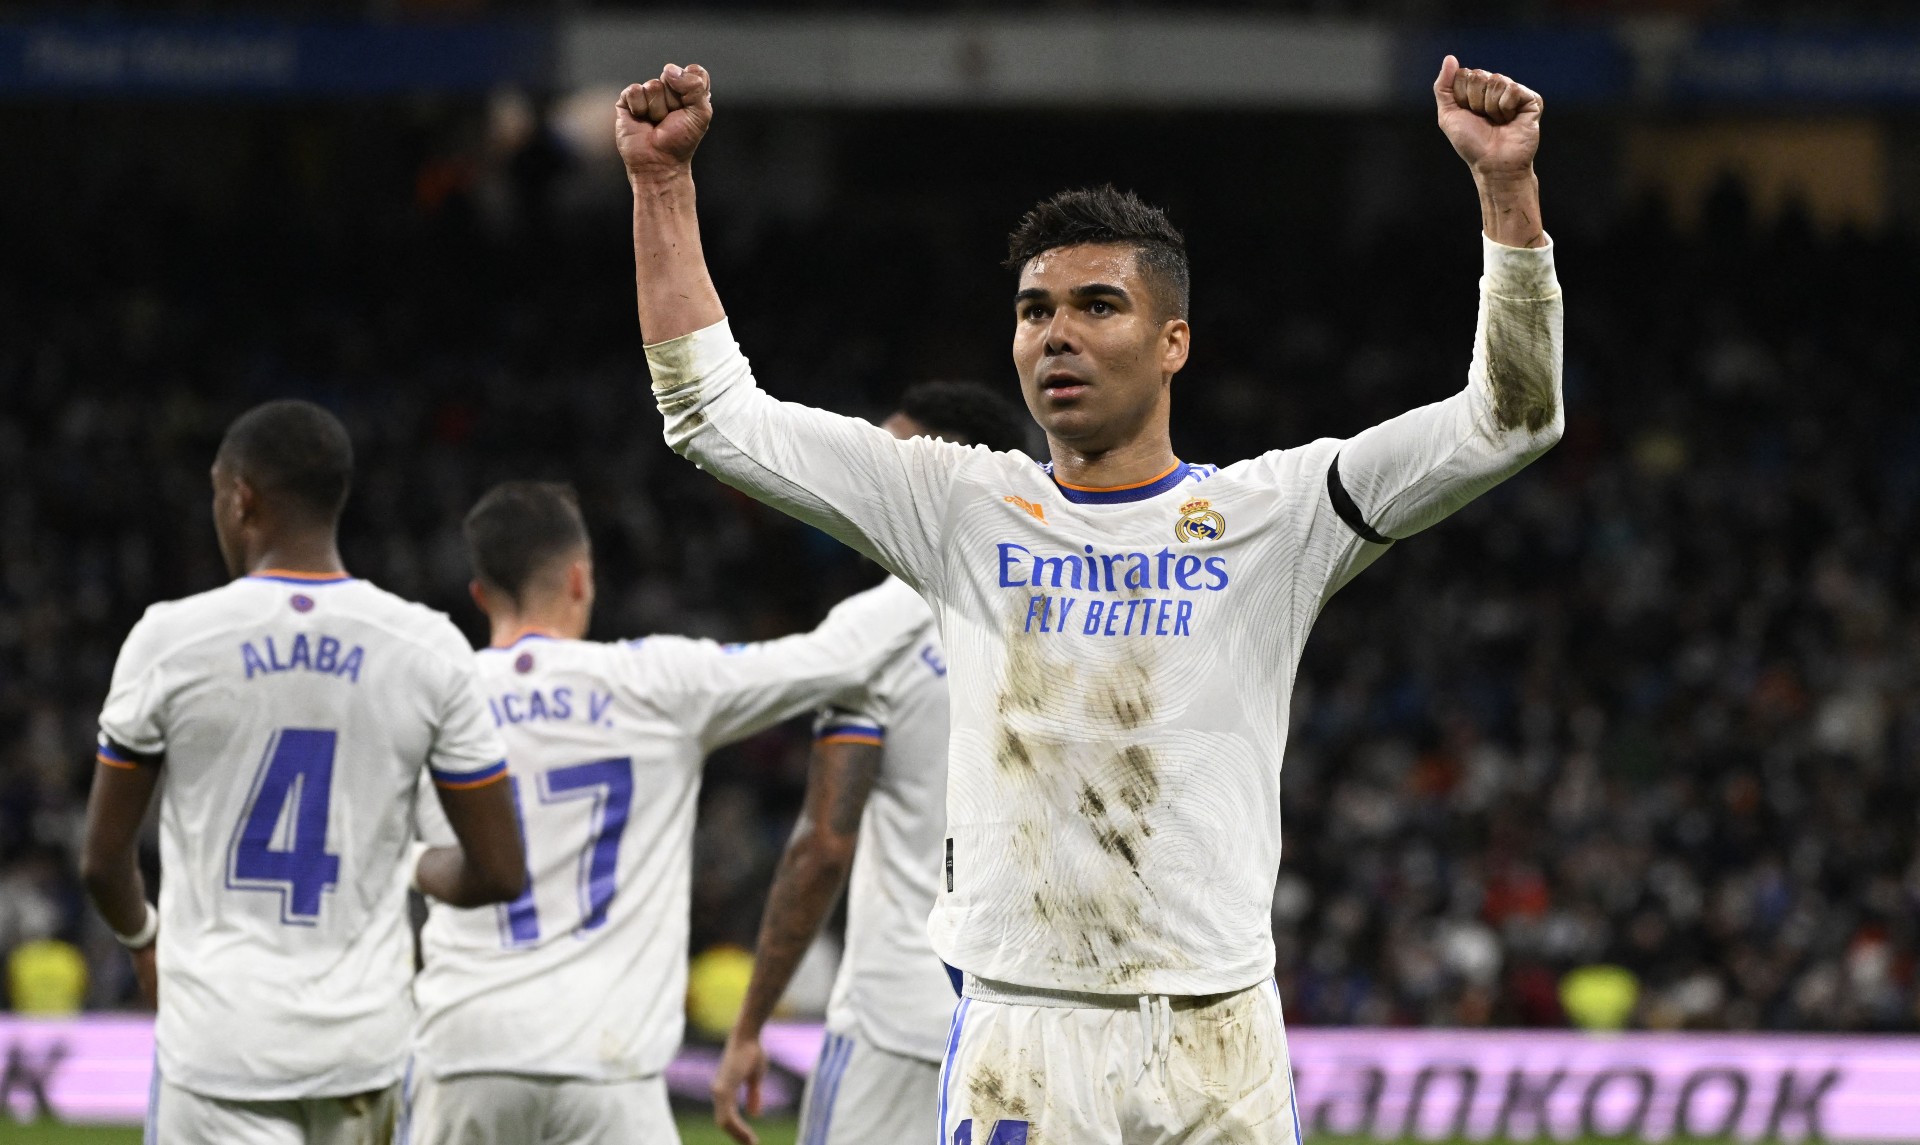 Real Madrid move 12 points clear in La Liga title race with Getafe win - Football Espana